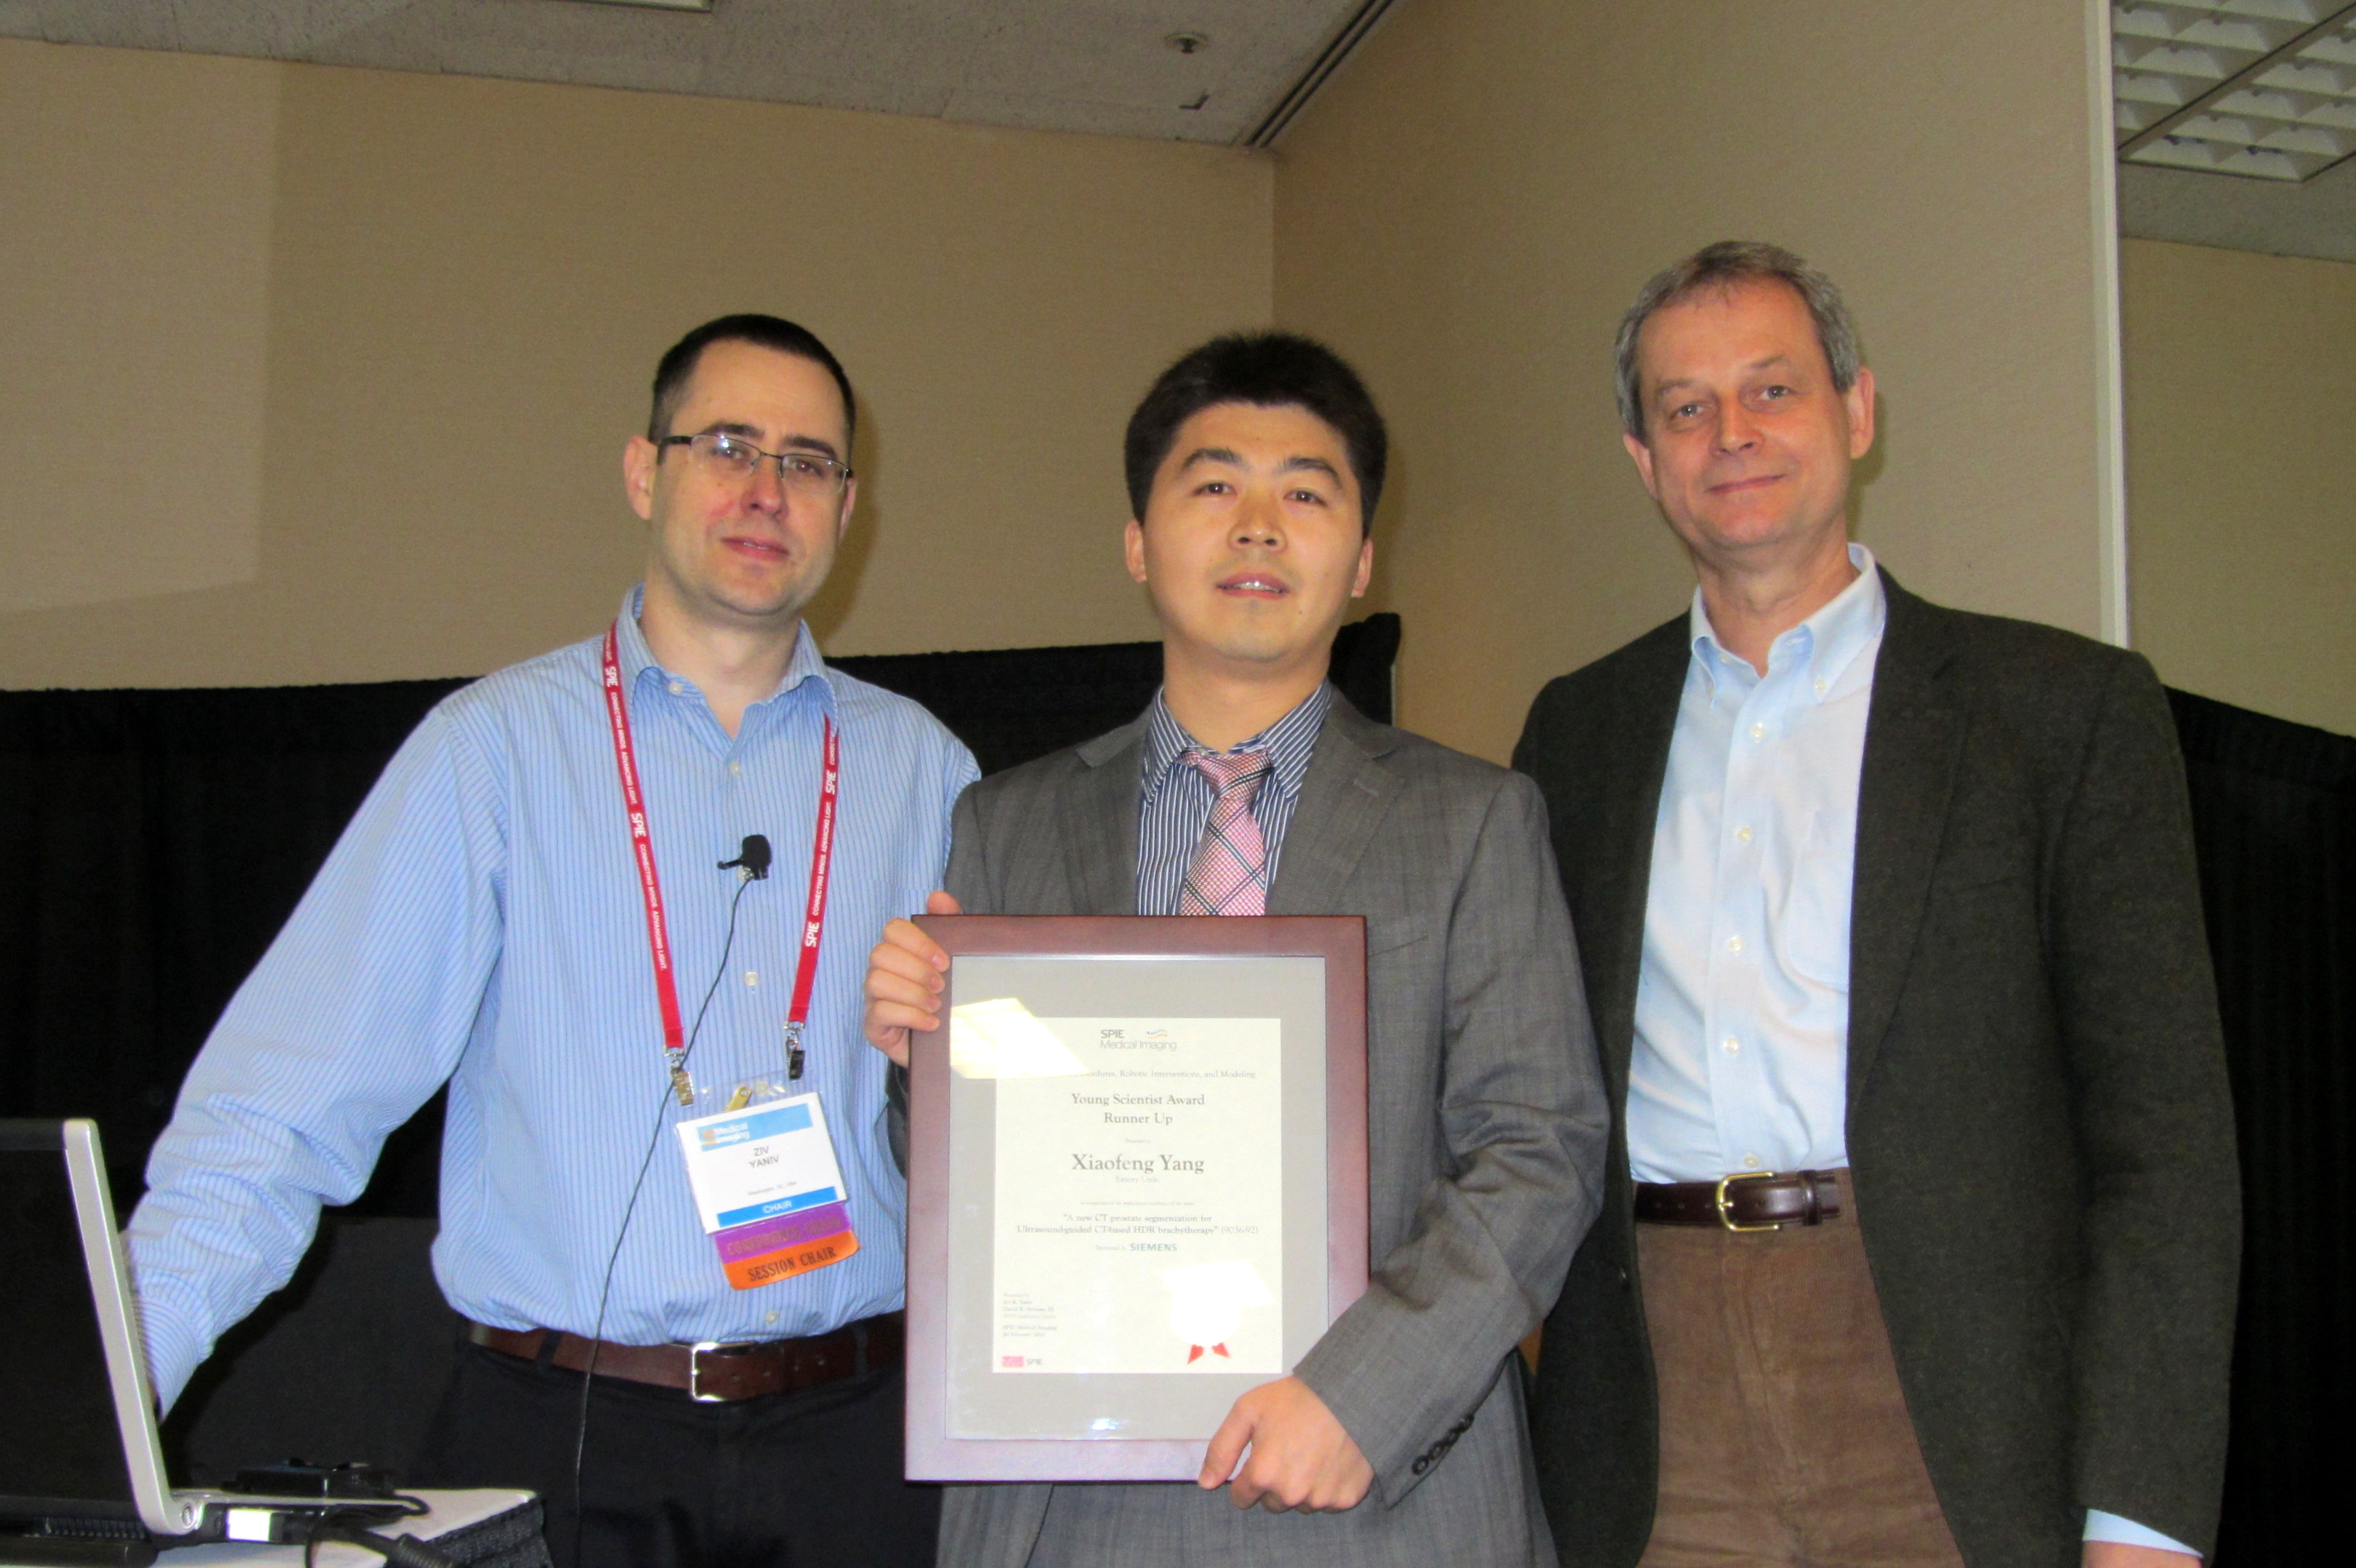 SPIE 2014: Image-Guided Procedures Young Scientist Runner Up